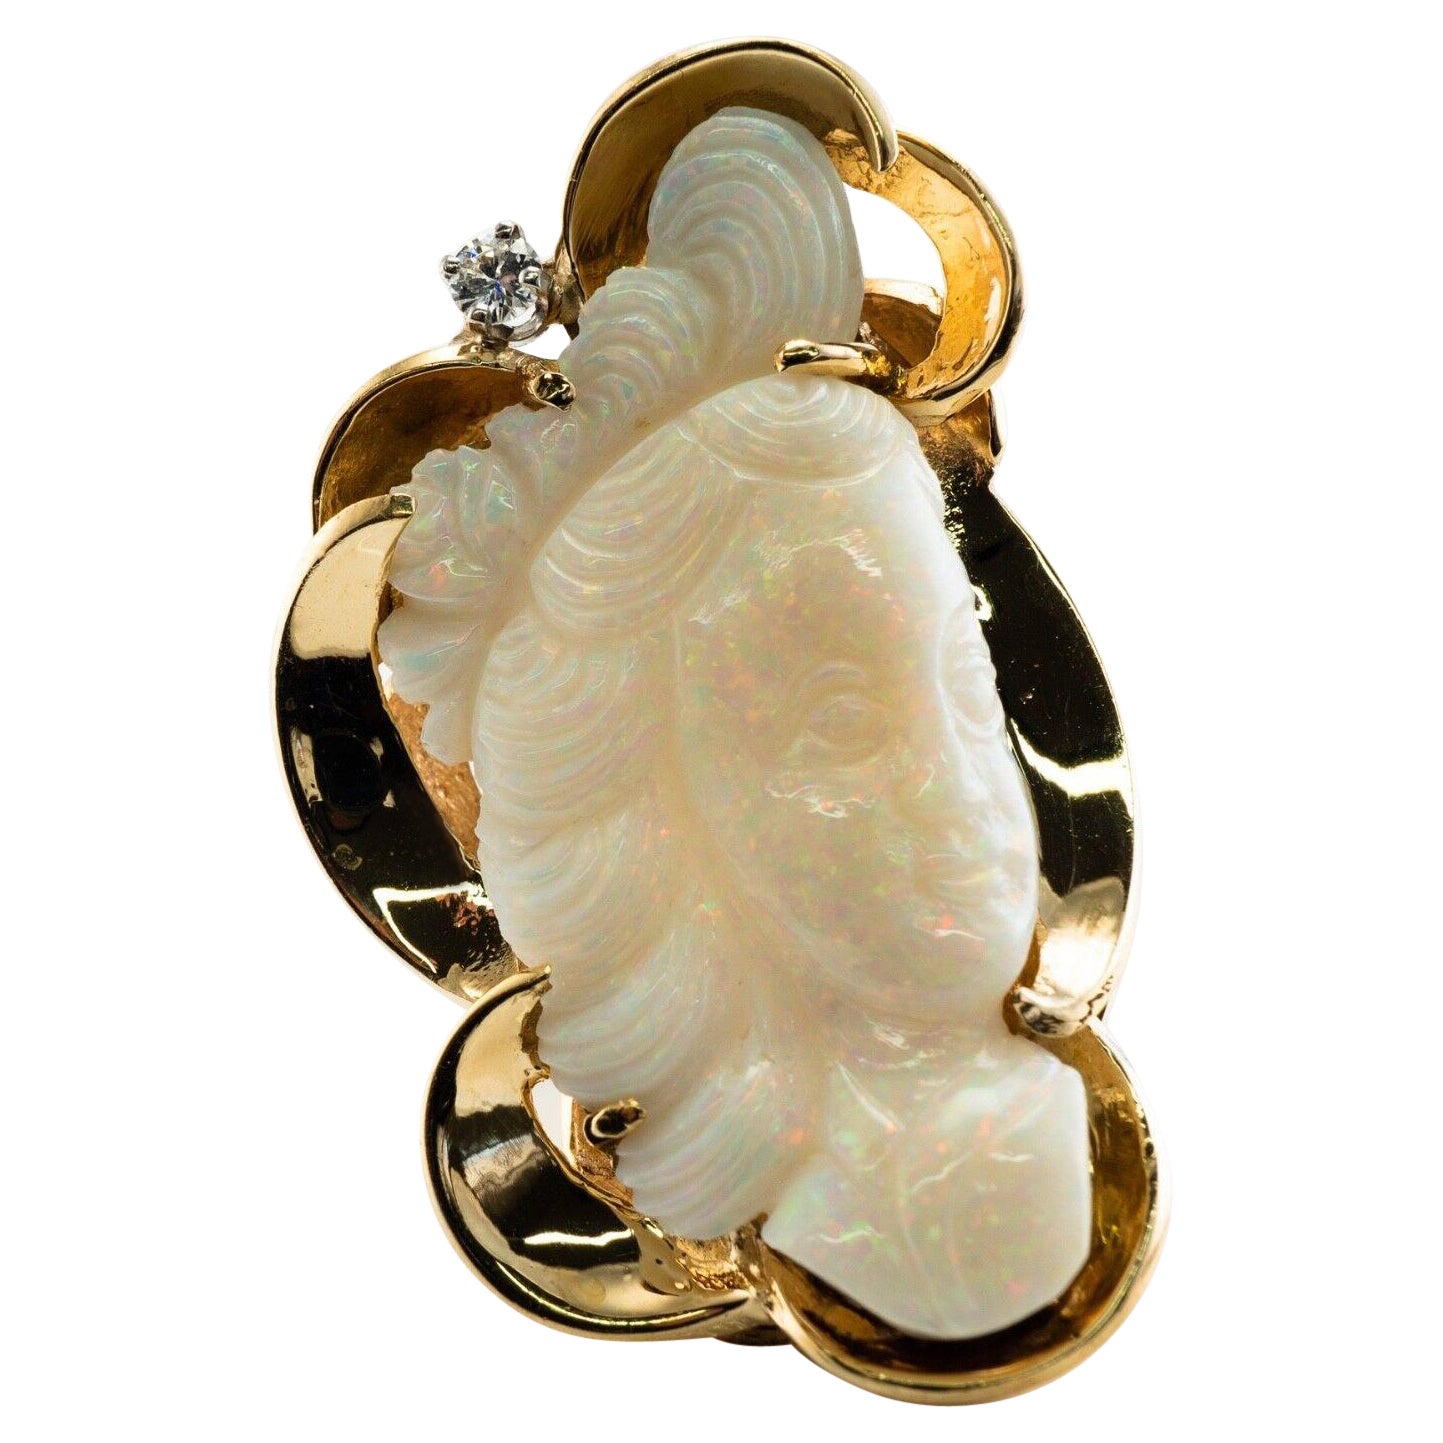 Diamant-Opal-Ring Cameo 14K Gold Vintage Cocktail mit Diamant